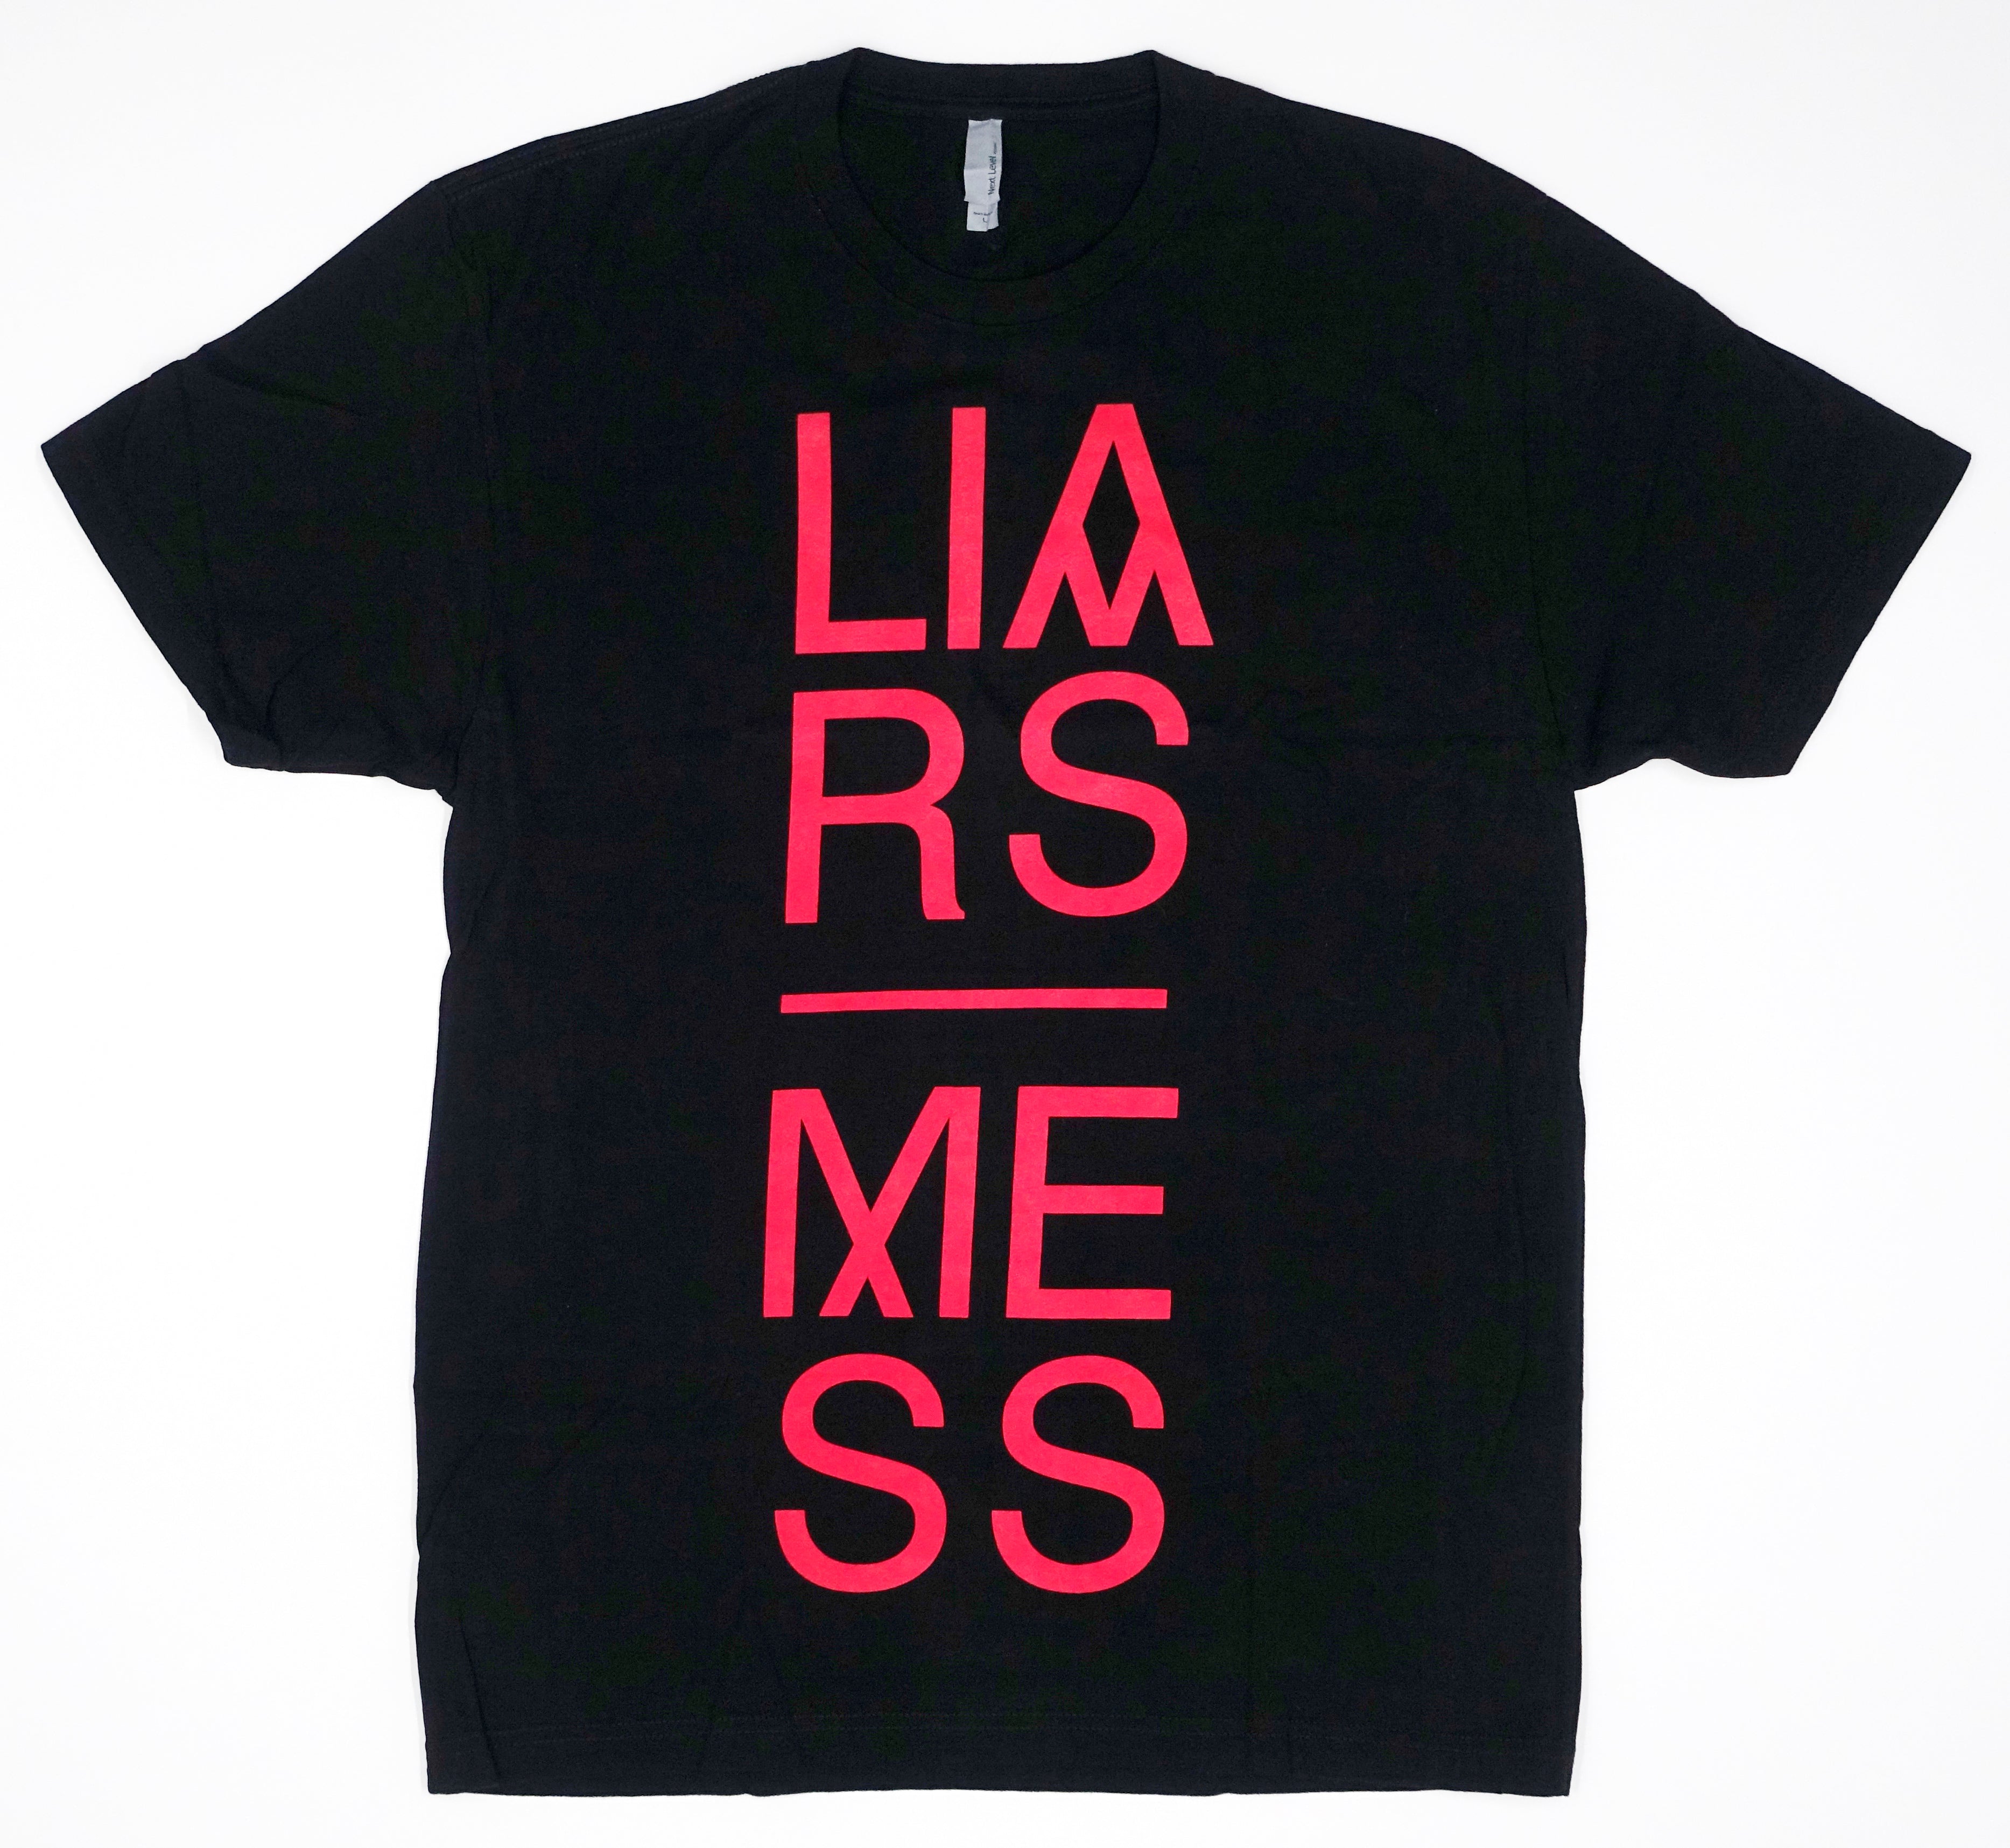 Liars - Mess Stacked Letters 2014 Tour Shirt Size Large